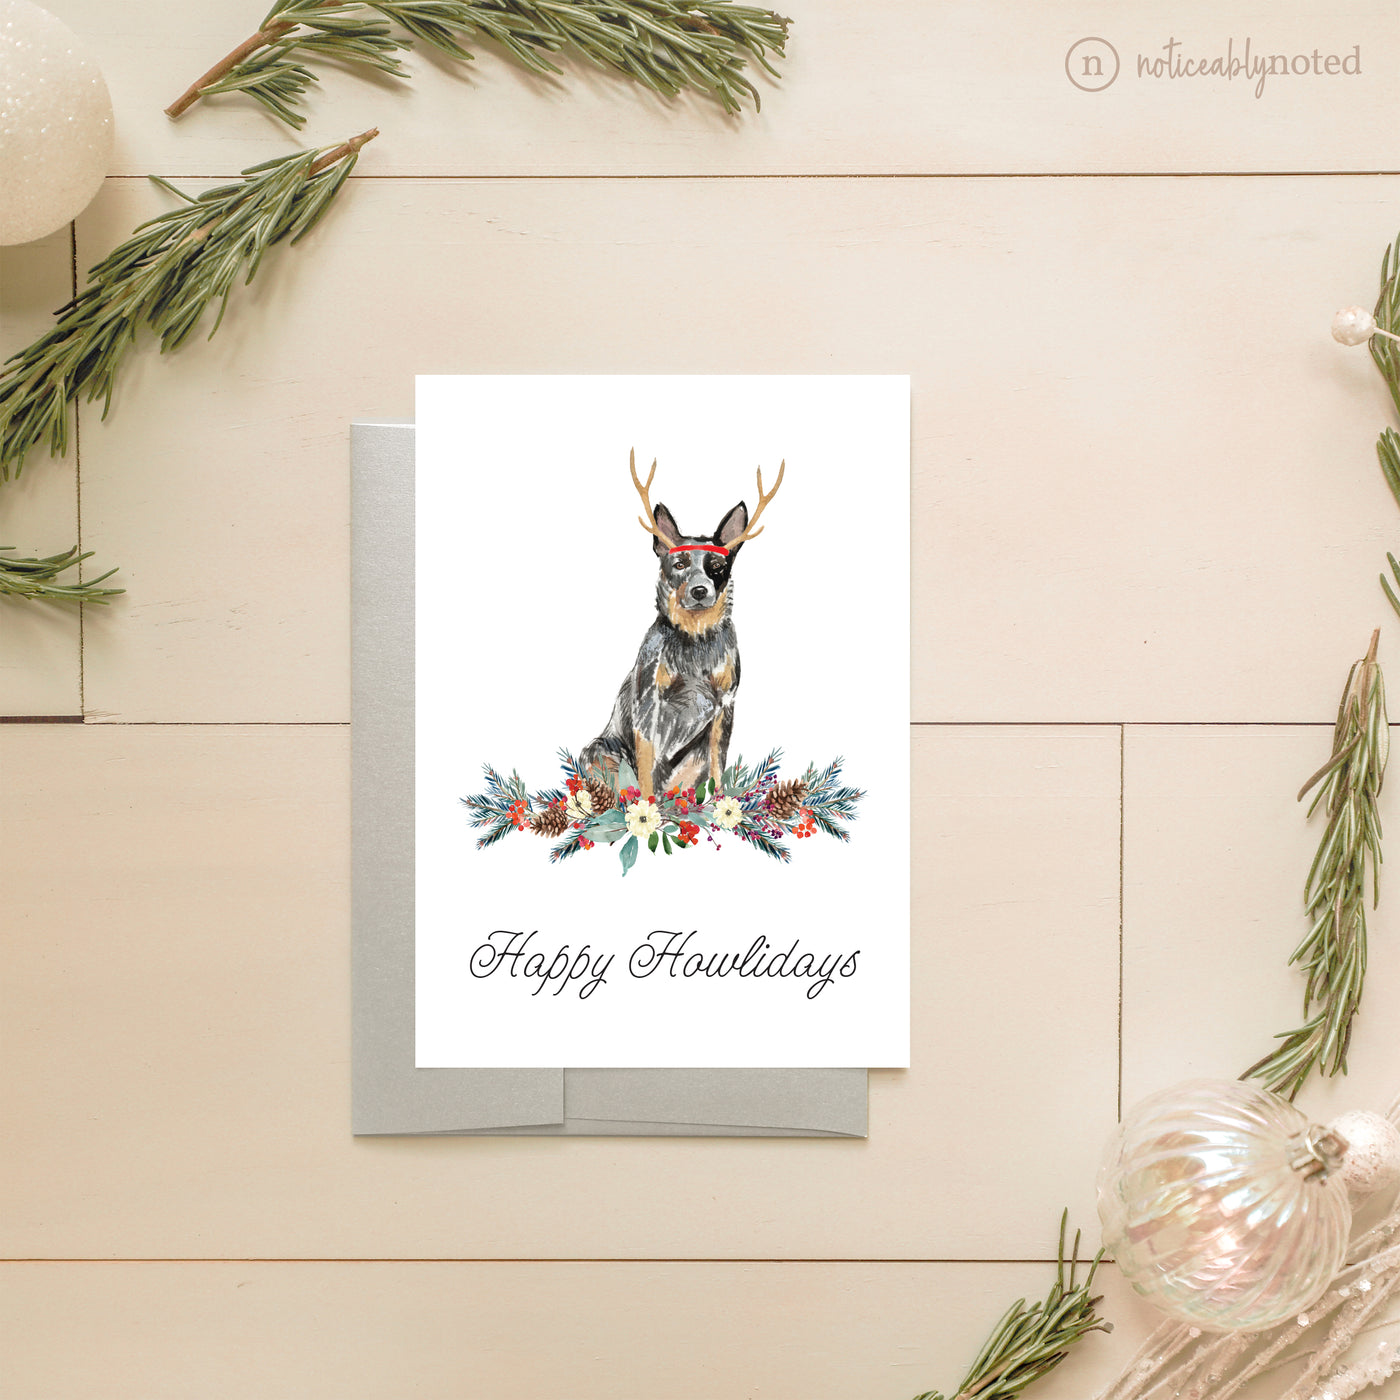 Australian Cattle Dog Holiday Card | Noticeably Noted